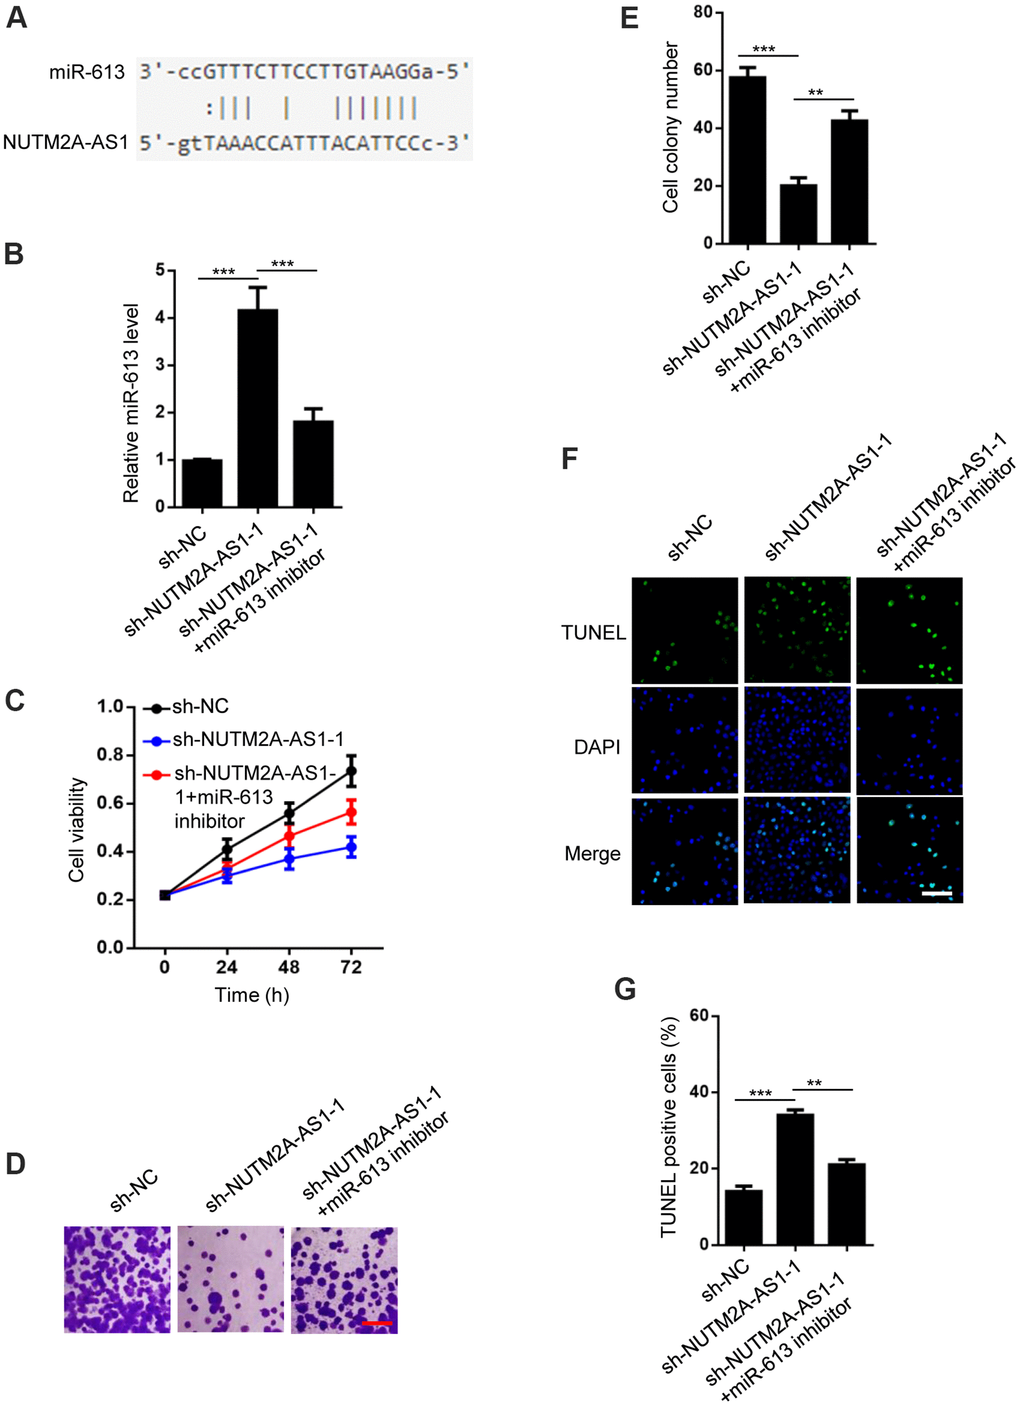 MiR-613 rescues NUTM2A-AS1-regulated matrine resistance in GC cells. (A) StarBase 2.0 shows that miR-613 is a target of NUTM2A-AS1. (B) The reverse transcription-quantitative polymerase chain reaction was employed to evaluate the levels of miR-613 in N87 cells transfected with sh-NC, sh-NUTM2A-AS1-1, or sh-NUTM2A-AS1-1 plus the miR-613 inhibitor. ***P C) The viability of N87 cells transfected with sh-NC, sh-NUTM2A-AS1-1, or sh-NUTM2A-AS1-1 plus the miR-613 inhibitor under matrine treatment was examined by using the MTT assay. *P **P D, E) Cell colonies of N87 cells transfected with sh-NC, sh-NUTM2A-AS1-1, or sh-NUTM2A-AS1-1 plus the miR-613 inhibitor under matrine treatment. Scale bar, 5 μm. **P ***P F, G) Apoptosis of N87 cells transfected with sh-NC, sh-NUTM2A-AS1-1, or sh-NUTM2A-AS1-1 plus the miR-613 inhibitor under matrine treatment was examined by using the TUNEL assay. Scale bar, 5 μm. **P ***P 